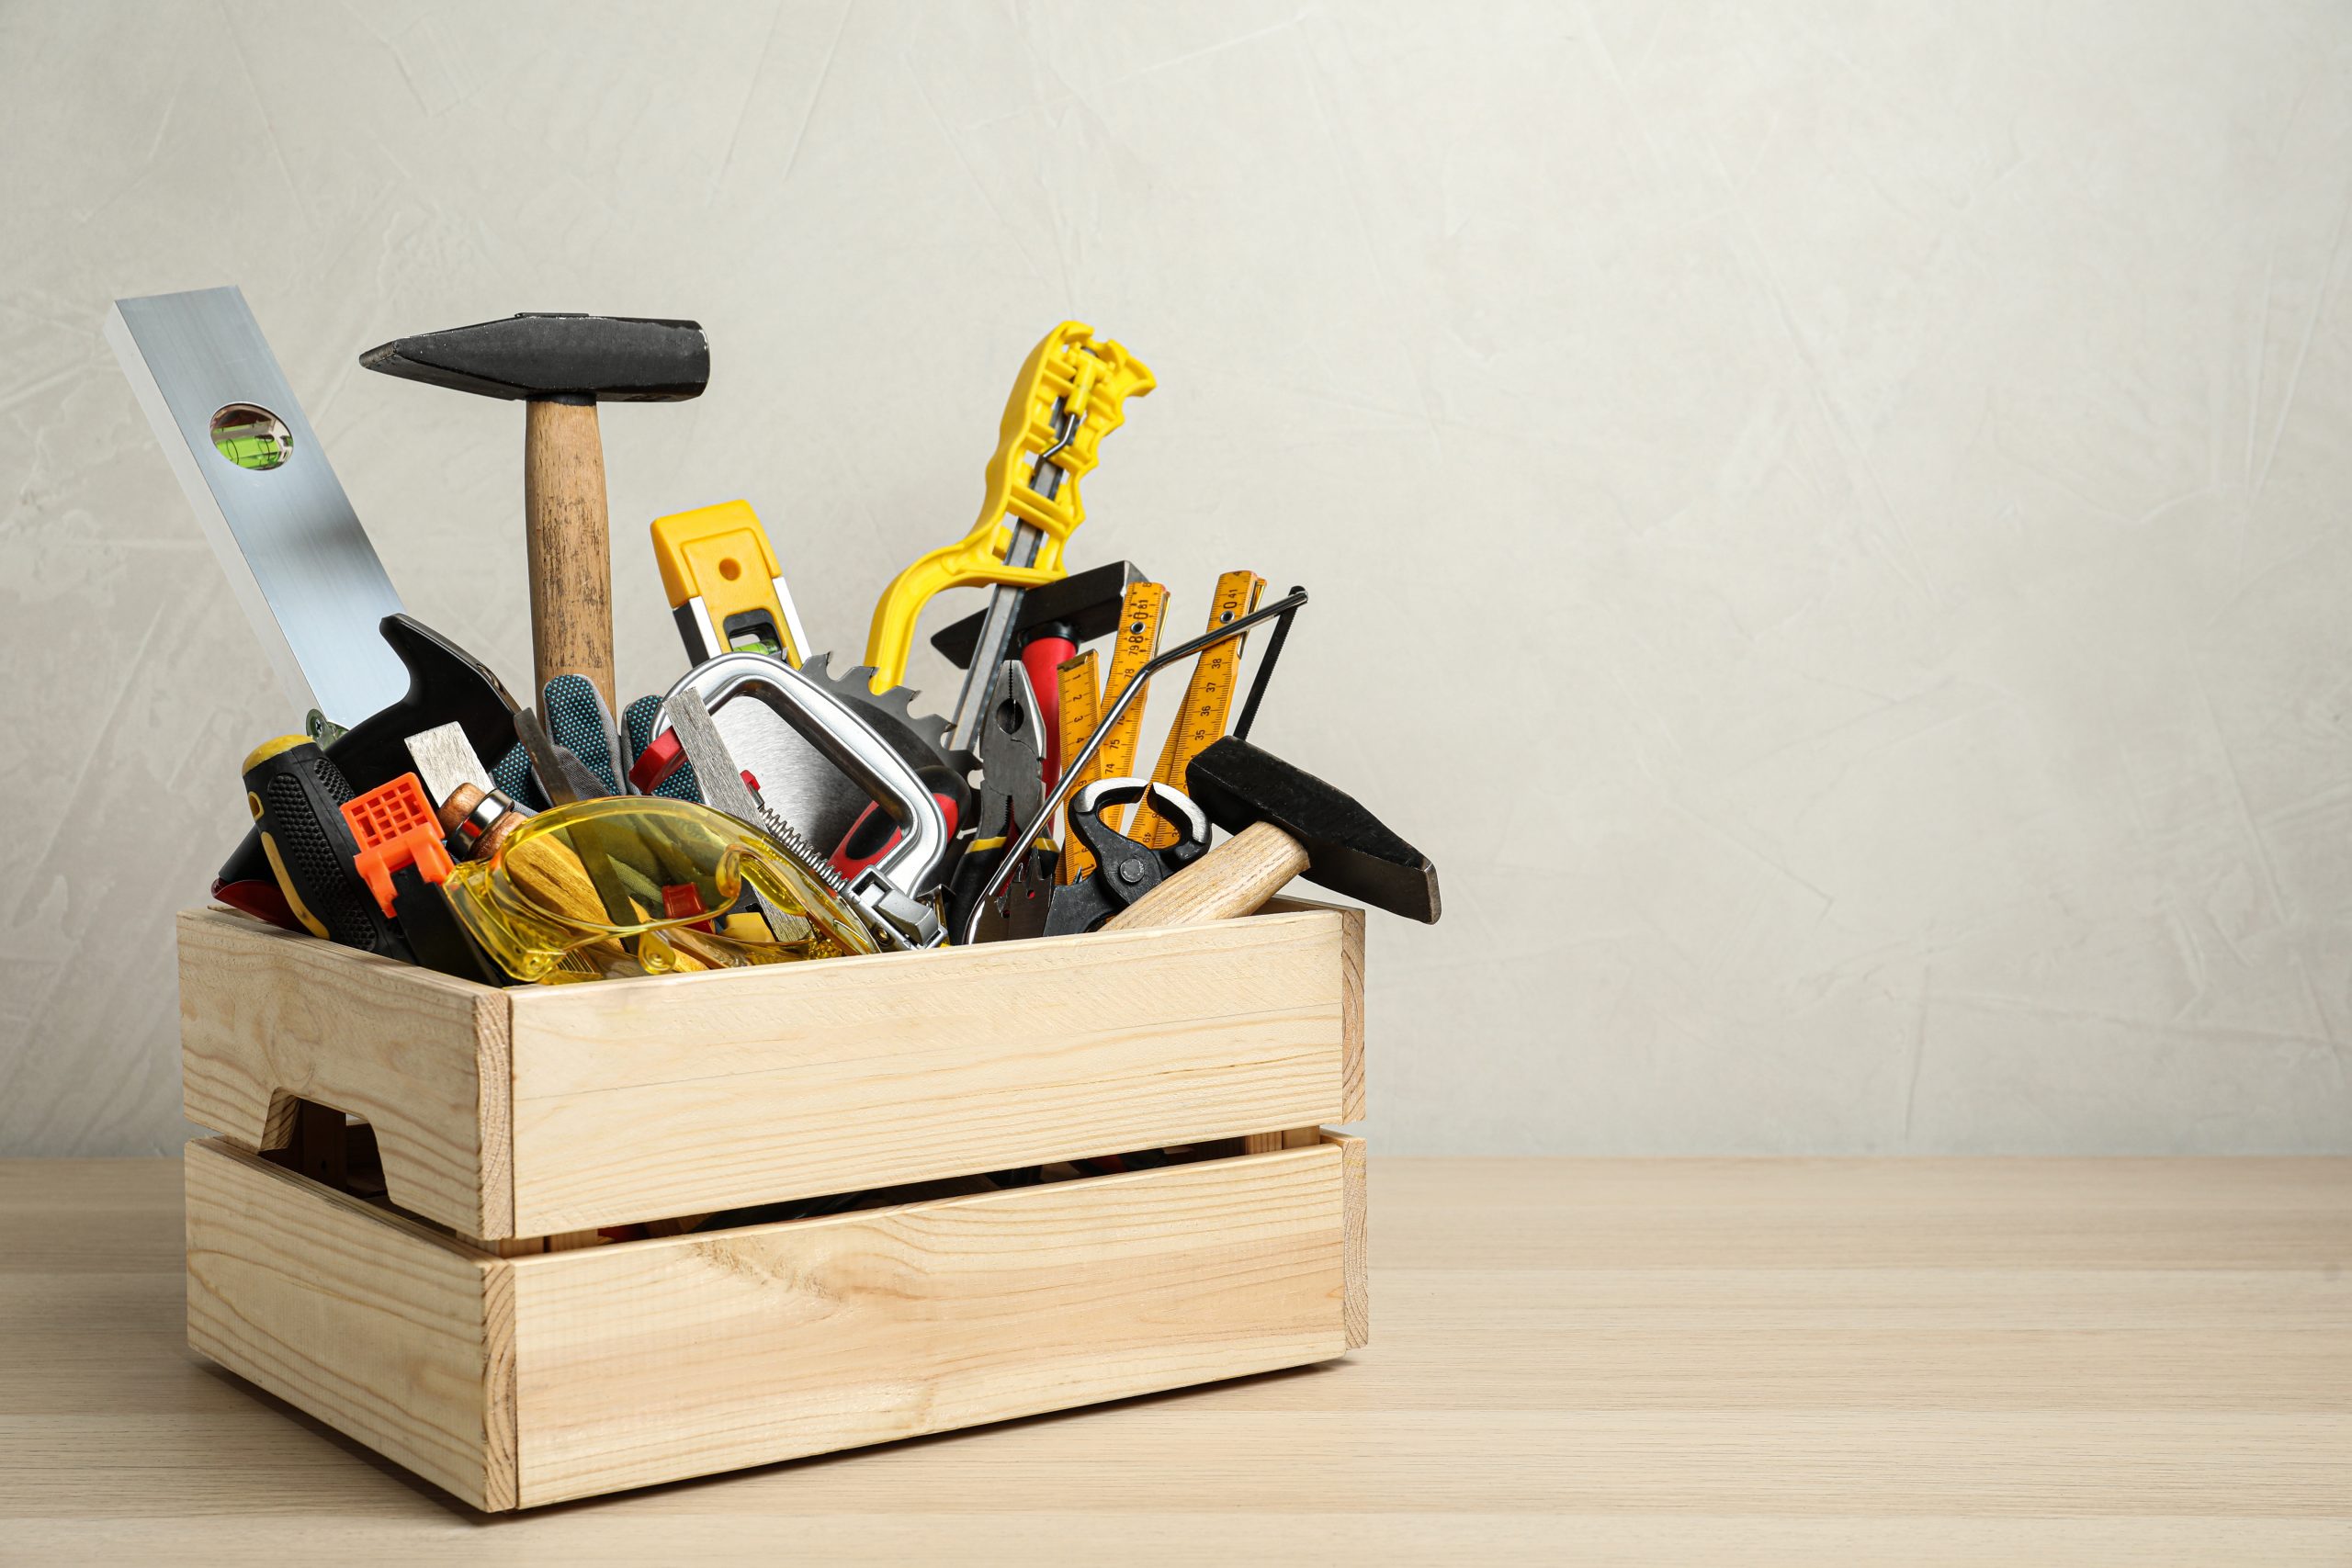 Tools Everyone Should Add to Their Toolkit